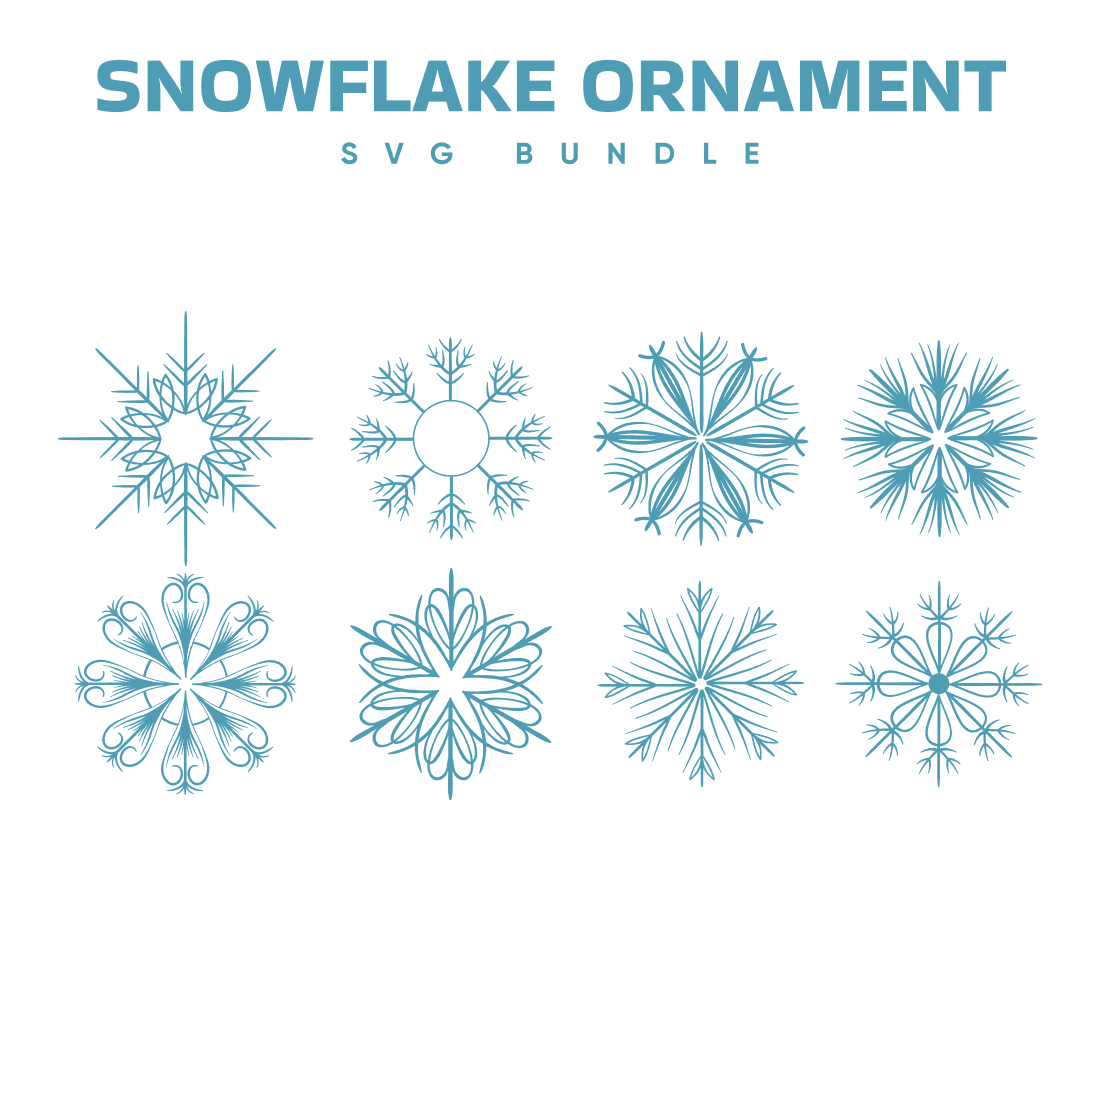 Snowflake Ornament SVG - main image preview.